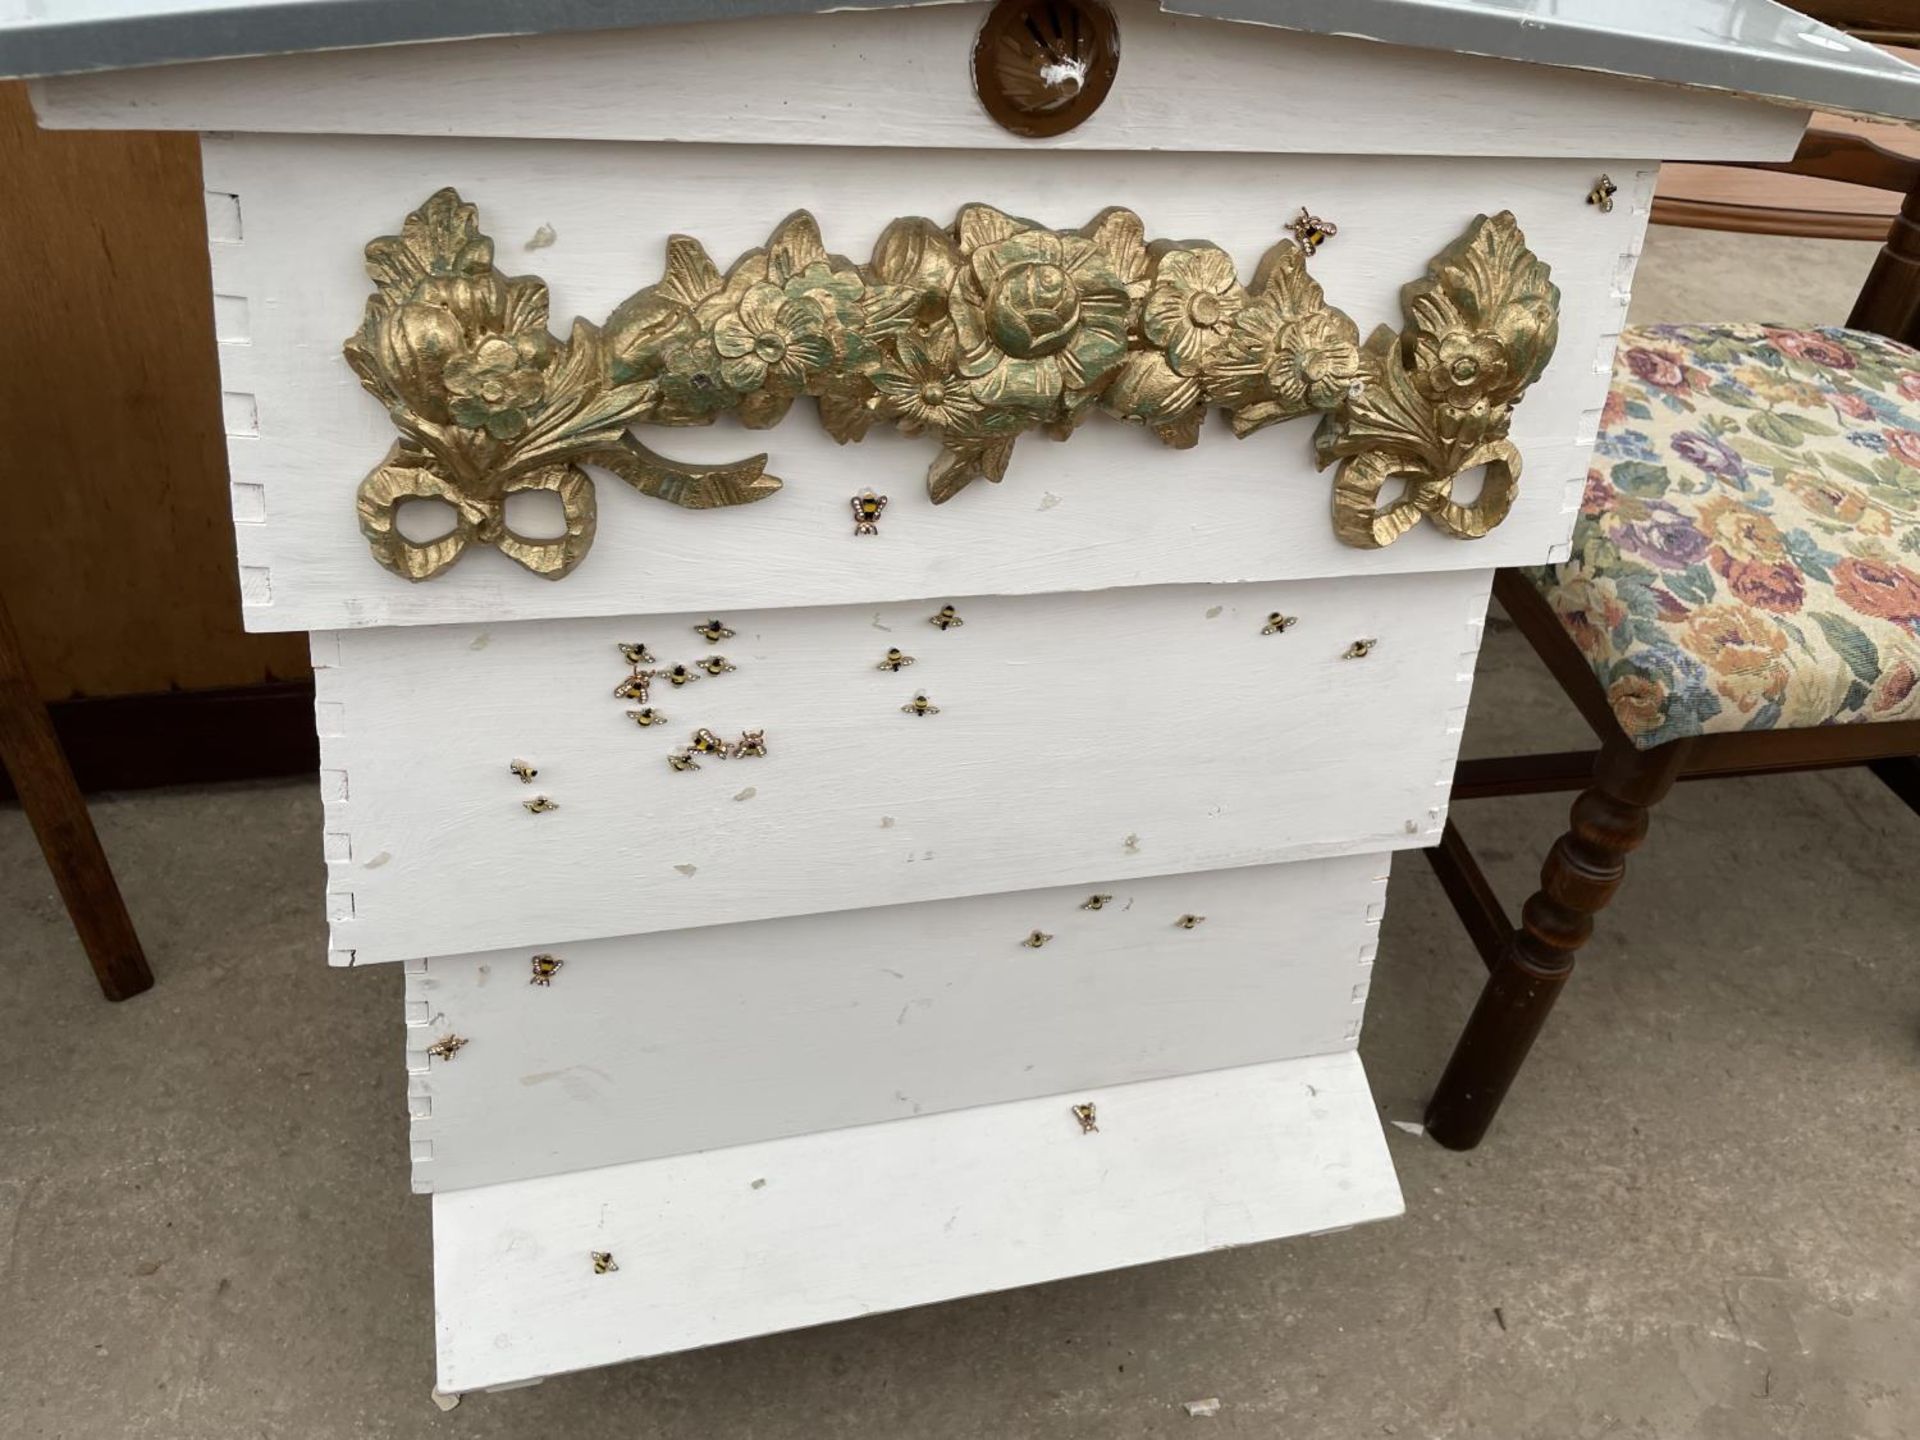 A FOUR TIER WHITE PAINTED FORMER BEEHIVE, DECORATED WITH BEES AND FLOWERS - Image 4 of 4